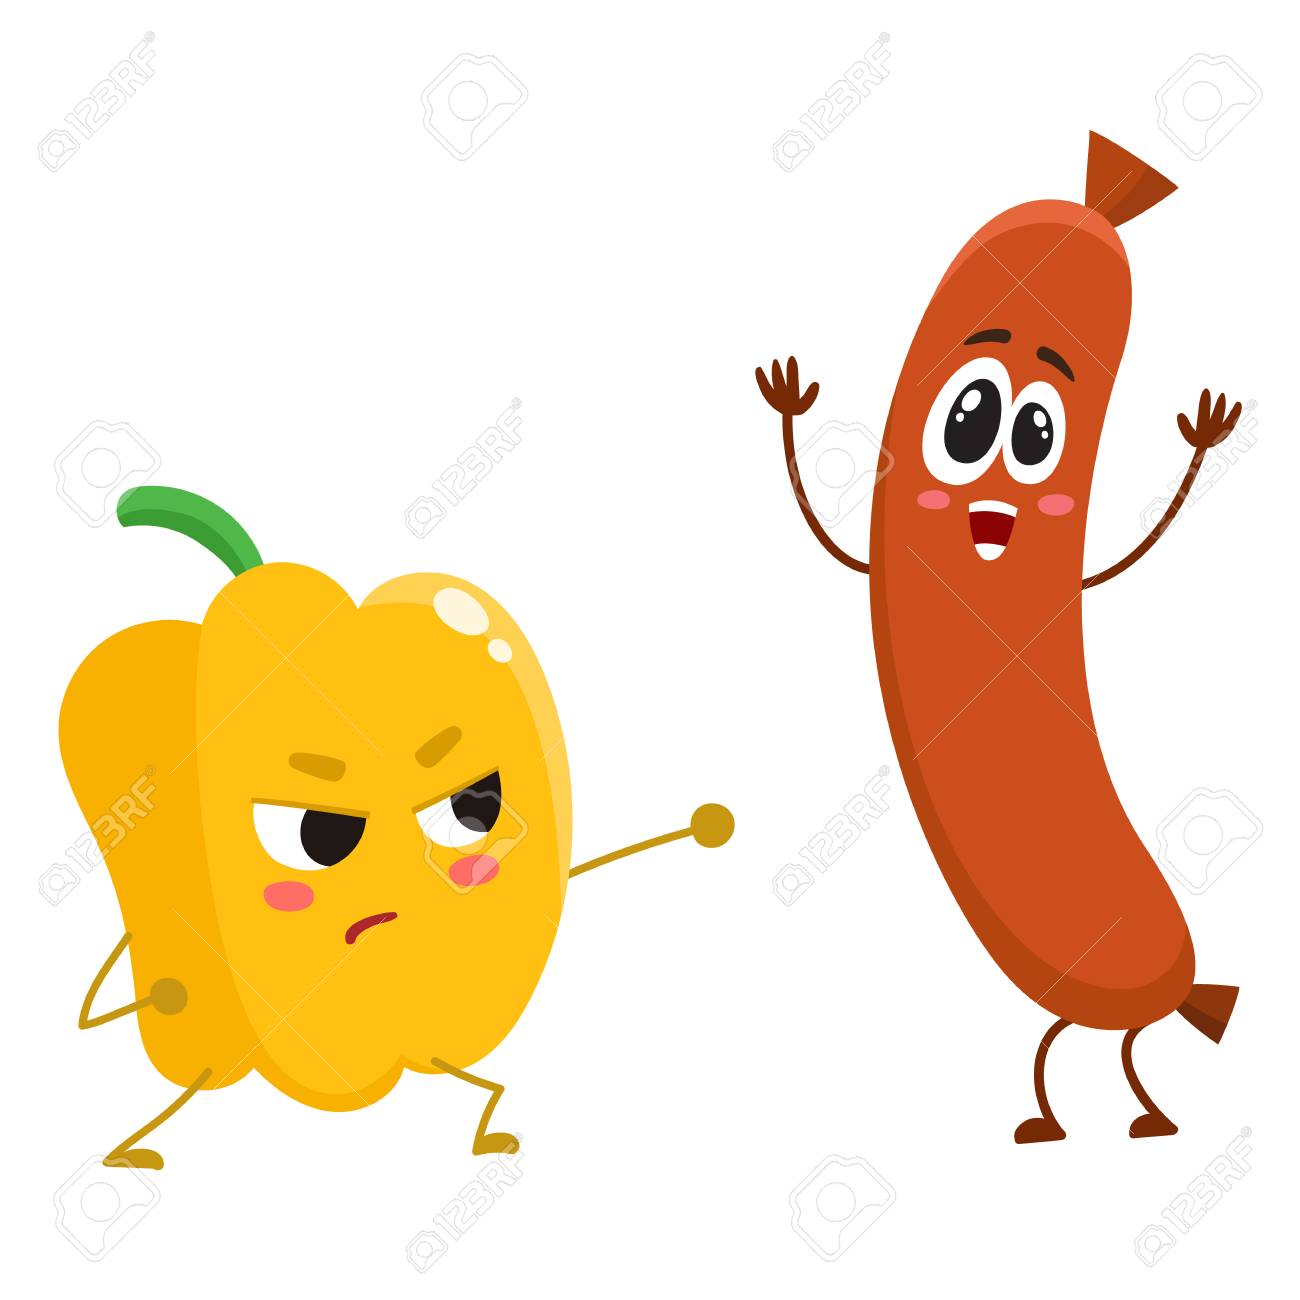 Funny food characters, pepper versus sausage, healthy lifestyle...